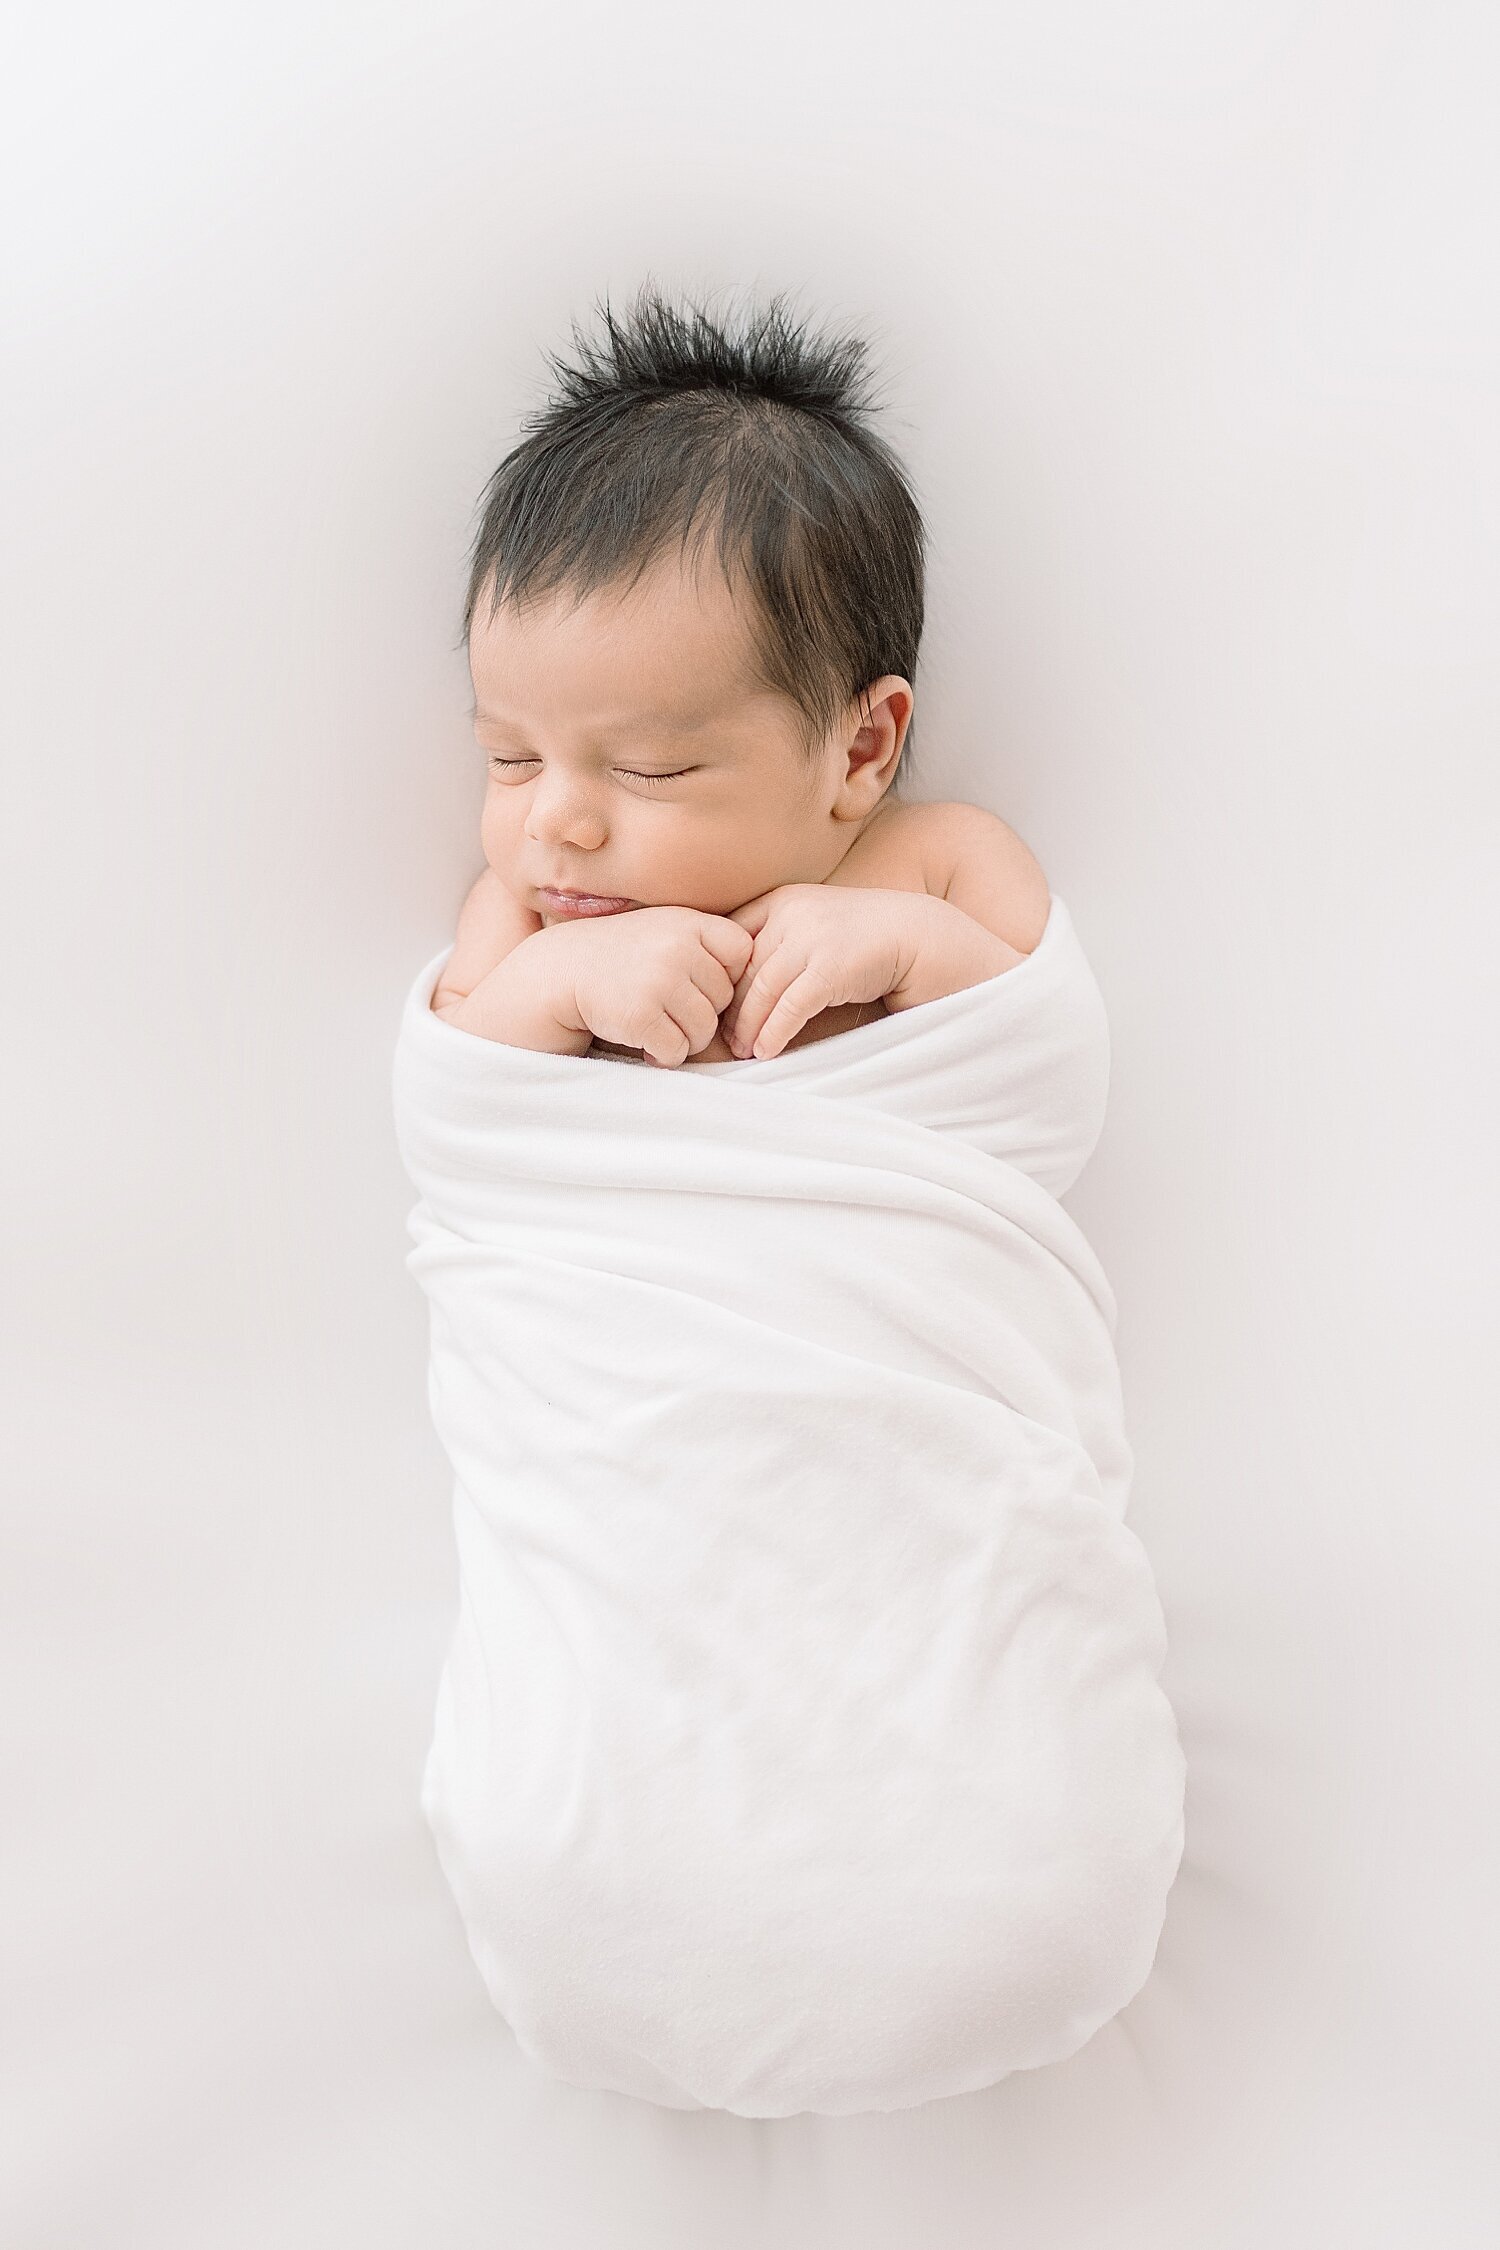 Newborn baby boy swaddled in a white blanket. Photo by Ambre Williams Photography, a newborn photographer in Newport Beach.